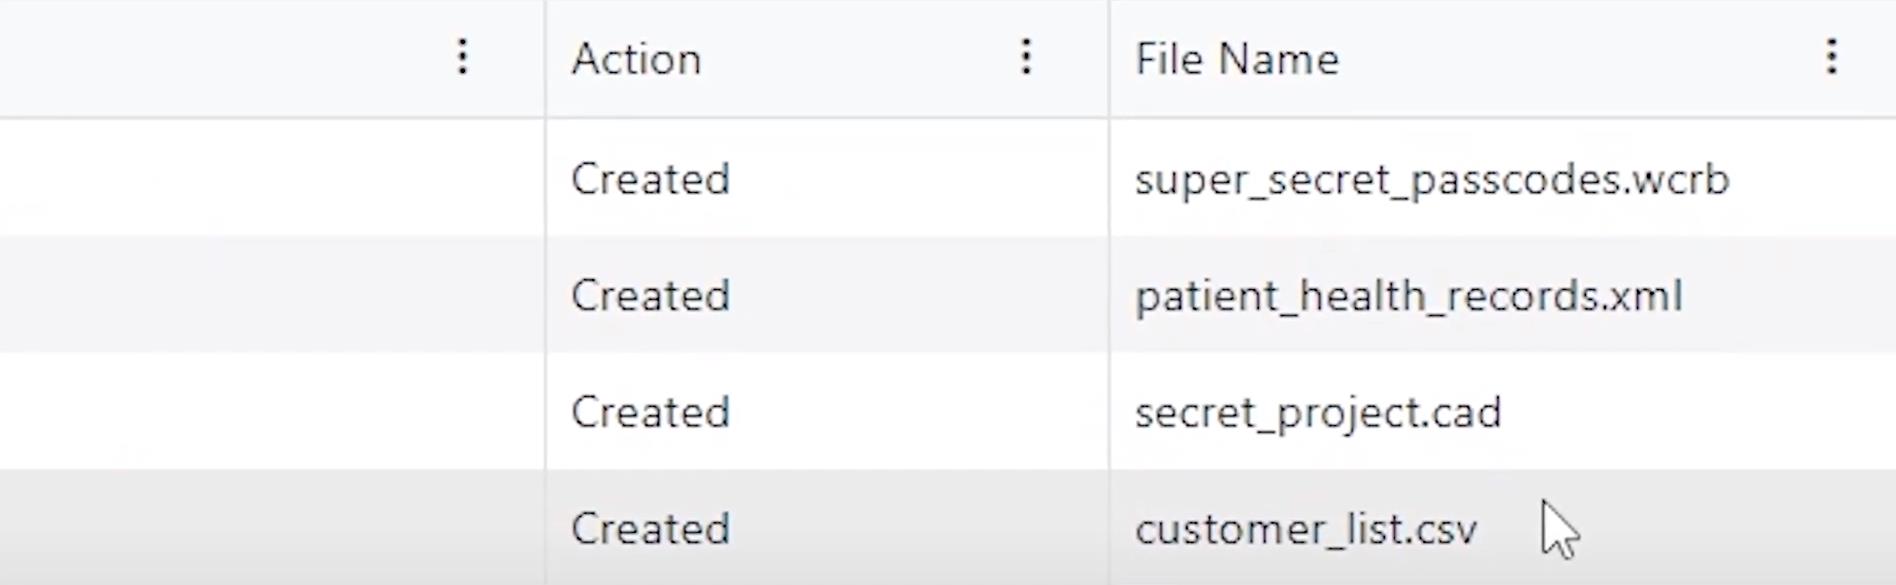 Screenshot of AccessPatrol's activity log with evidence sensitive files transferred to USB storage devices